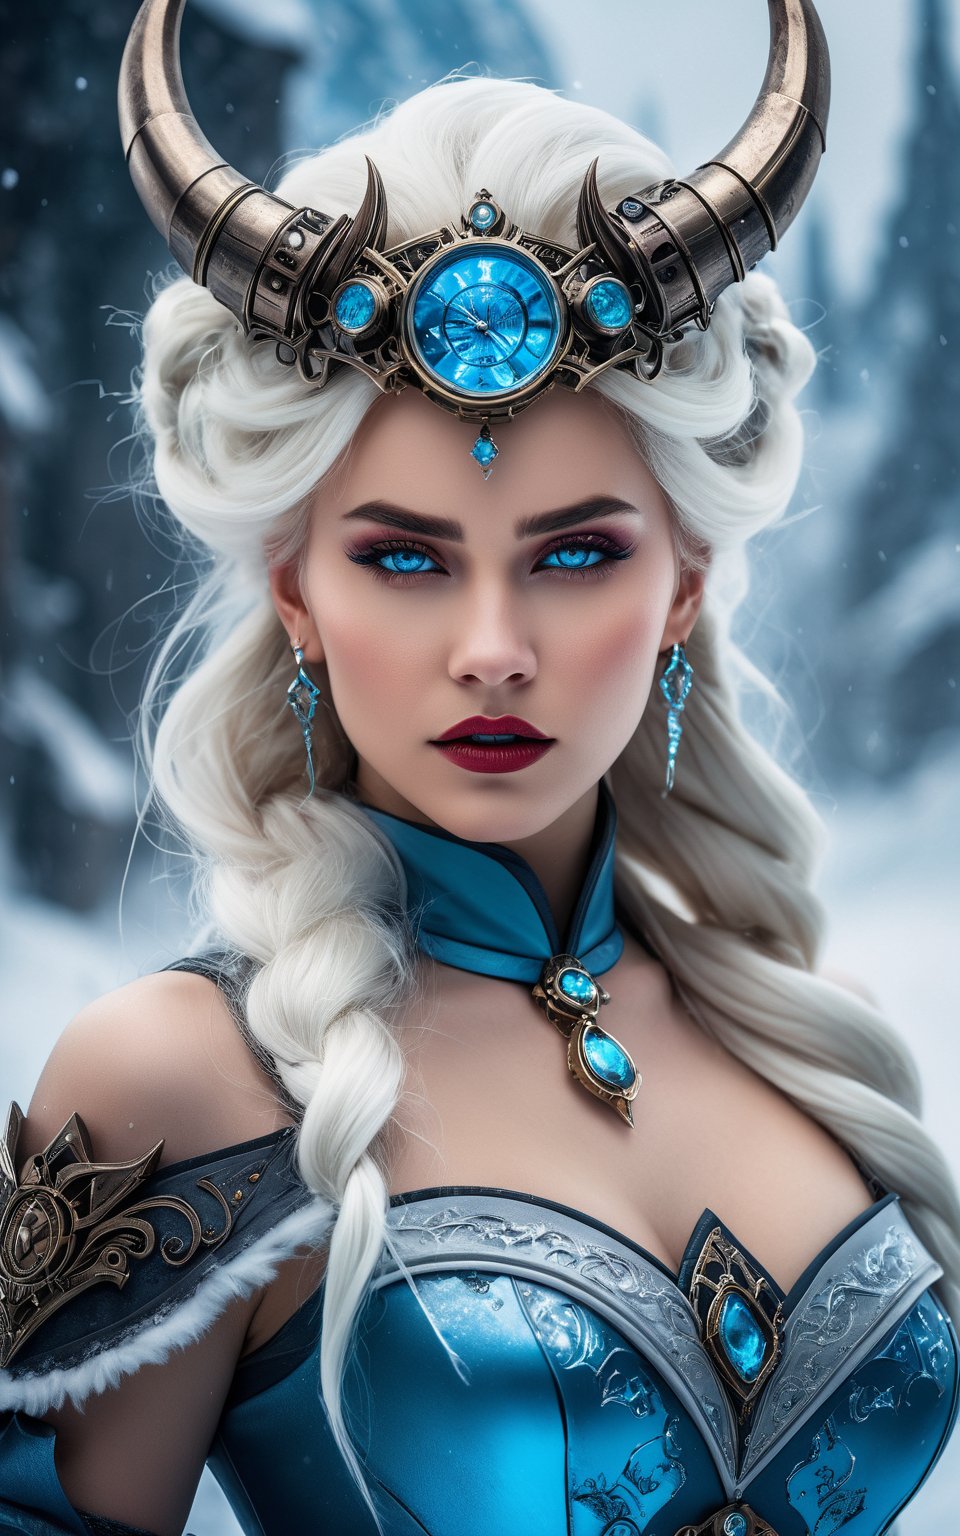 (best quality,8K,highres,masterpiece:1.5), an icy and vibrant depiction of Elsa in a steampunk-demon fusion, standing amidst an icy field. Her gaze is locked onto the viewer with an angry expression, embodying the fierce warrior spirit within her. Clad in intricate warrior armor adorned with icy blue and white lighting, Elsa exudes a commanding presence against the minimalist icy backdrop. The steampunk-demon fusion is evident in her horned headpiece and demonic-inspired elements integrated into her attire. Despite the minimalist detail, vibrant colors punctuate the scene, capturing the essence of her icy powers and fiery determination. This artwork, presented in a cowboy shot, portrays Elsa as a formidable and captivating figure, with earrings adding a subtle yet stylish touch to her appearance.